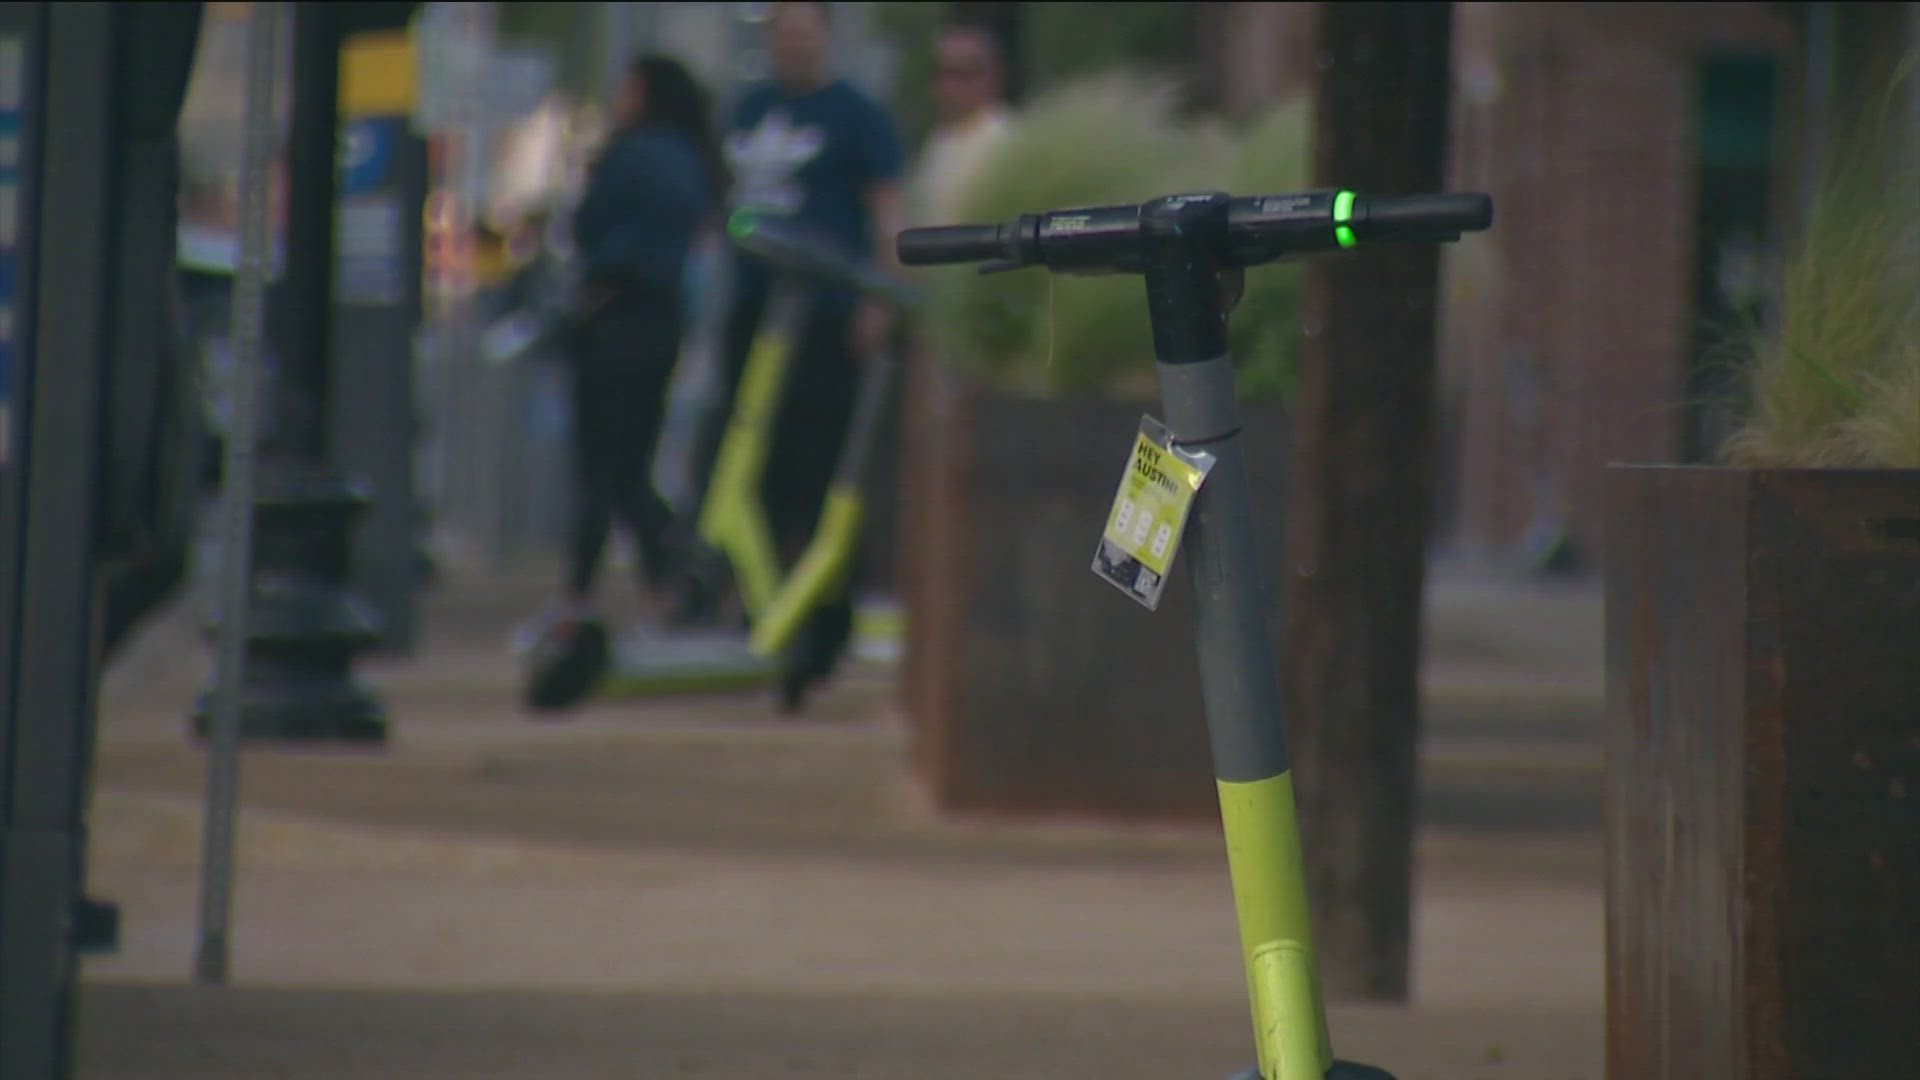 As of October 2022, there have been an average of 10,000 rides per day on micro-mobility devices in Austin.